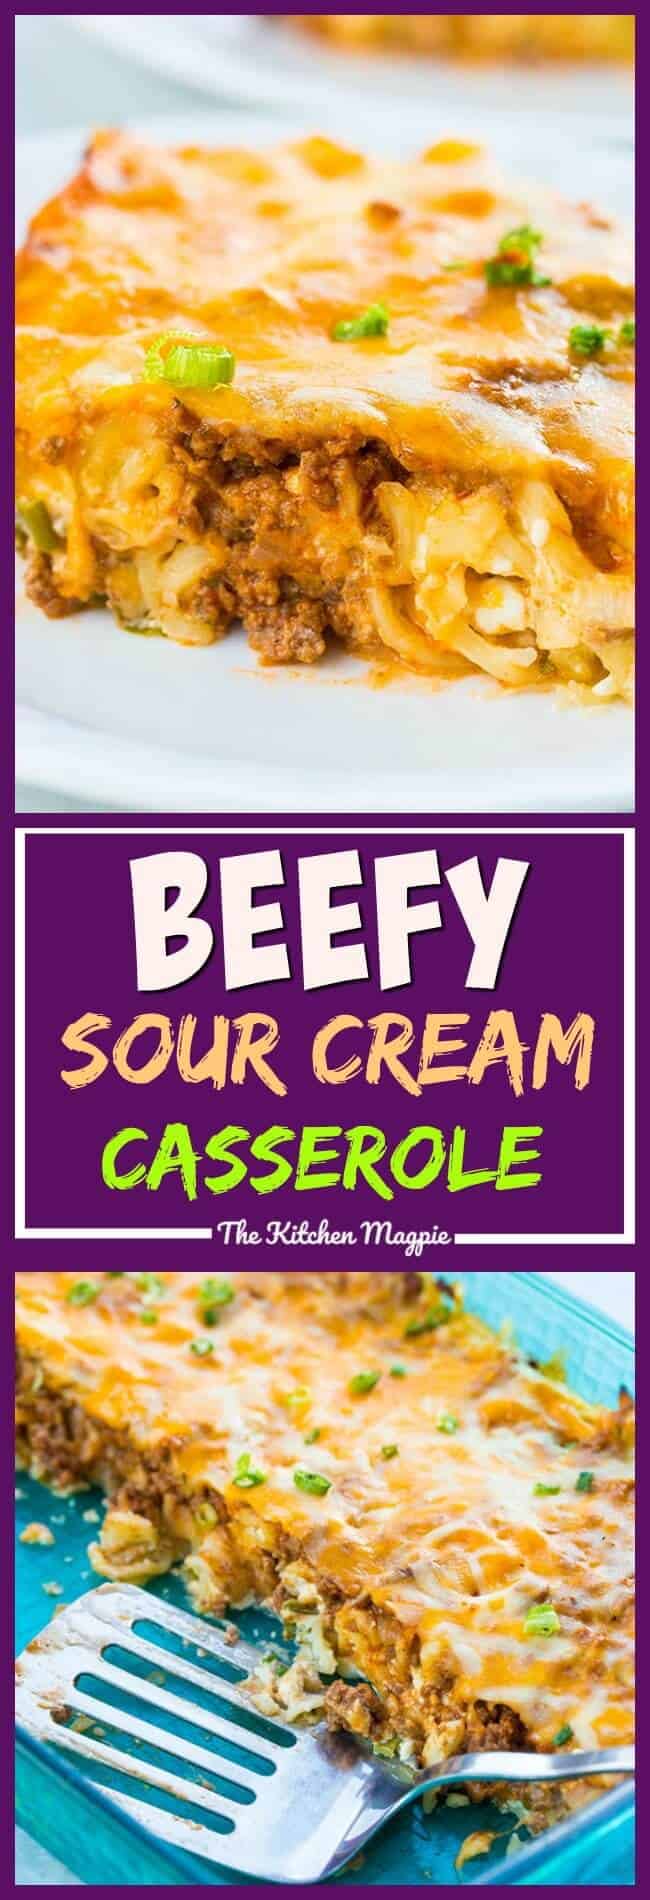  This classic Sour Cream Ground Beef Noodle Casserole is sure to be a hit with the entire family. It's easily adaptable to a lower fat version as well. #recipe #casserole #beef #sourcream #dinner #supper 